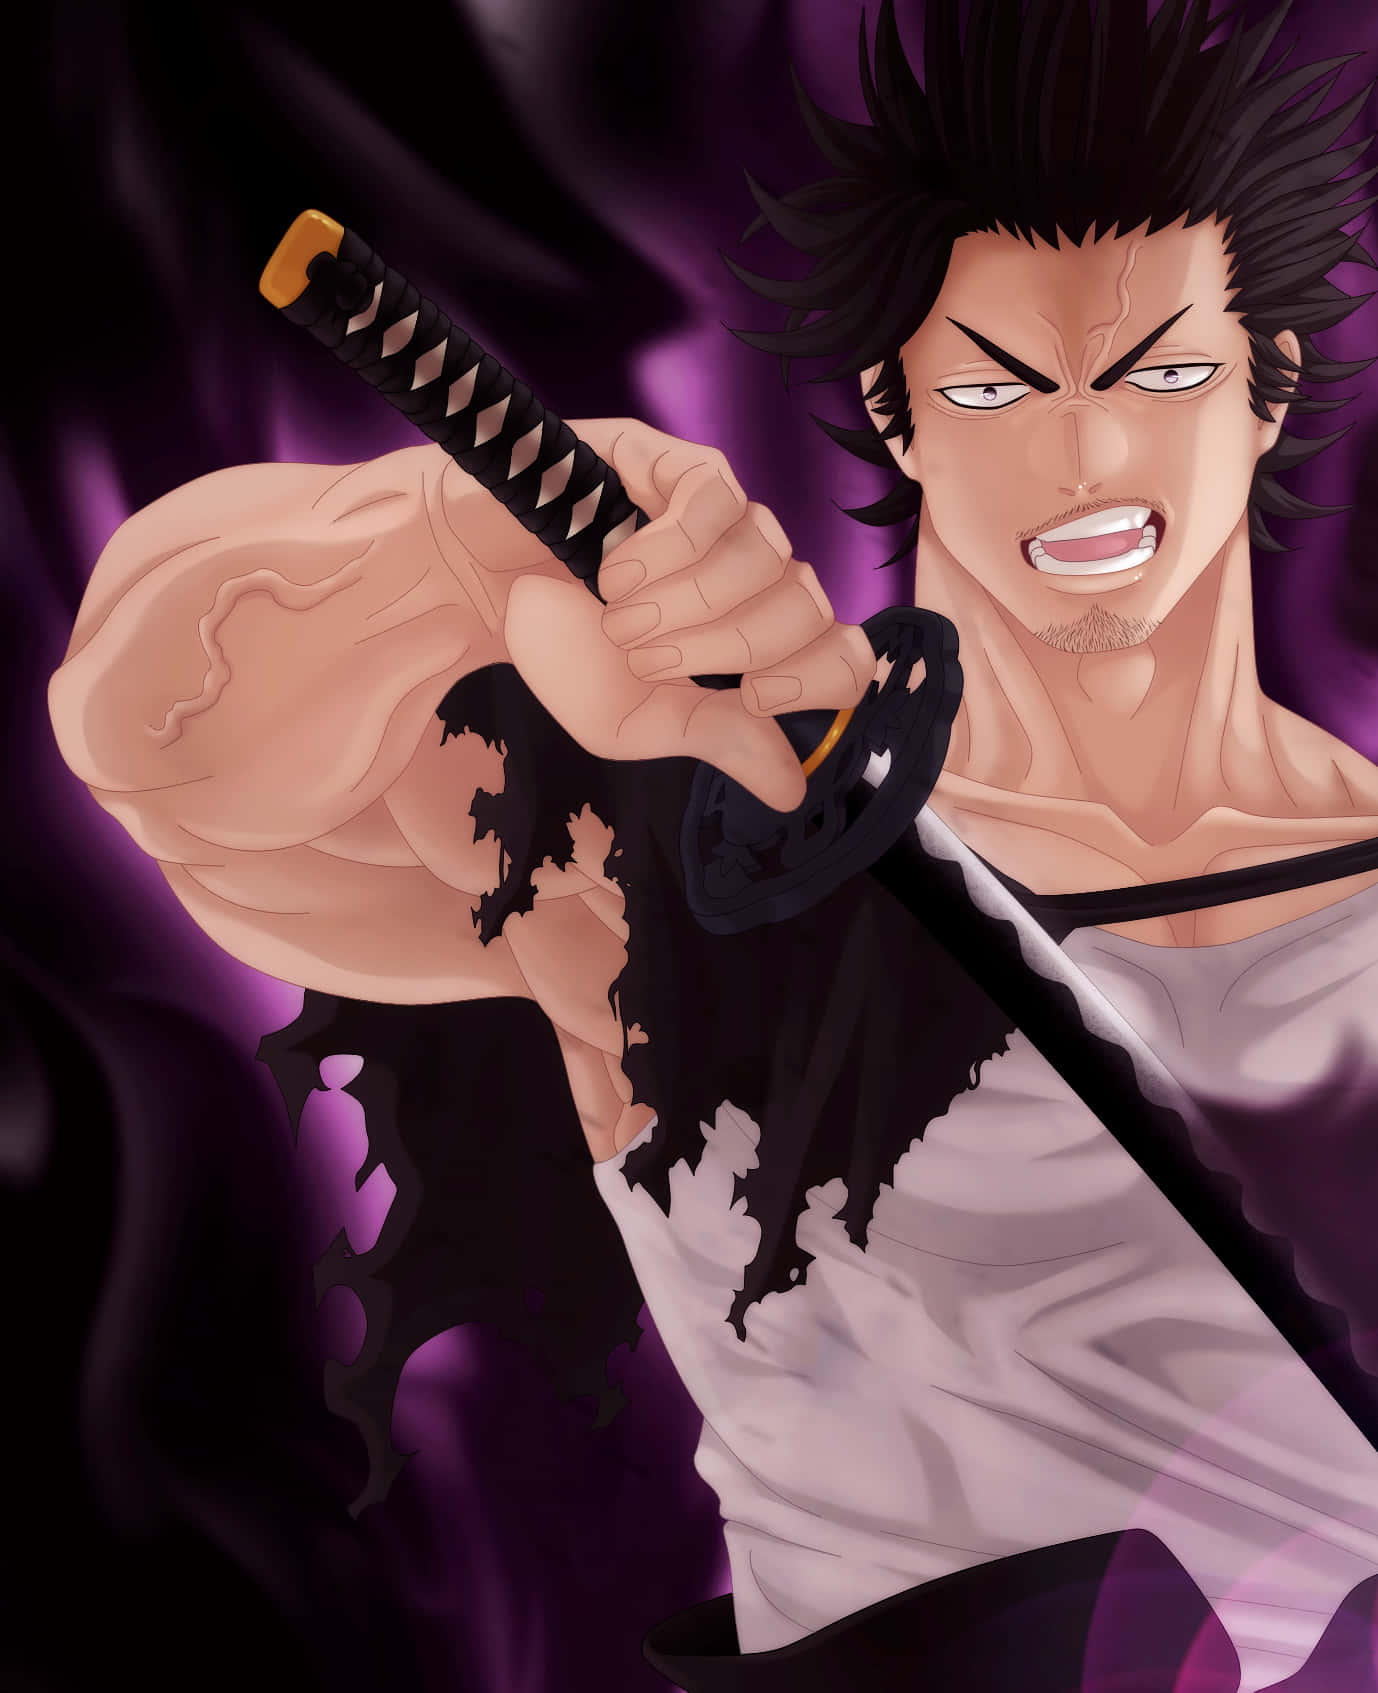 Yami of the Black Bulls, ready to take on any enemy! Wallpaper